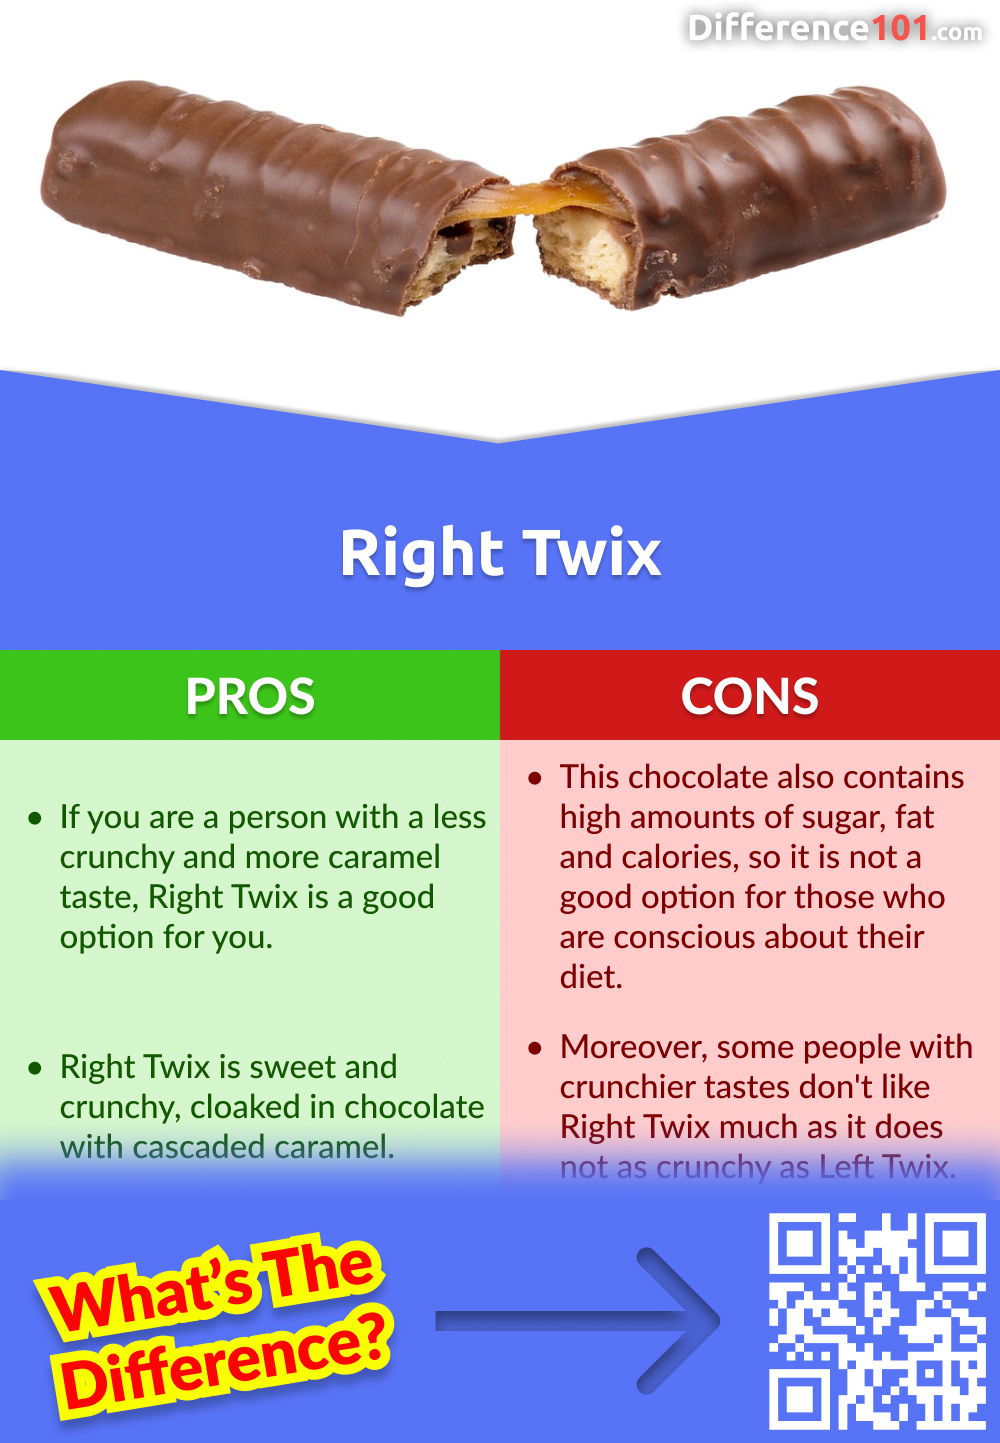 Right Twix Pros and Cons